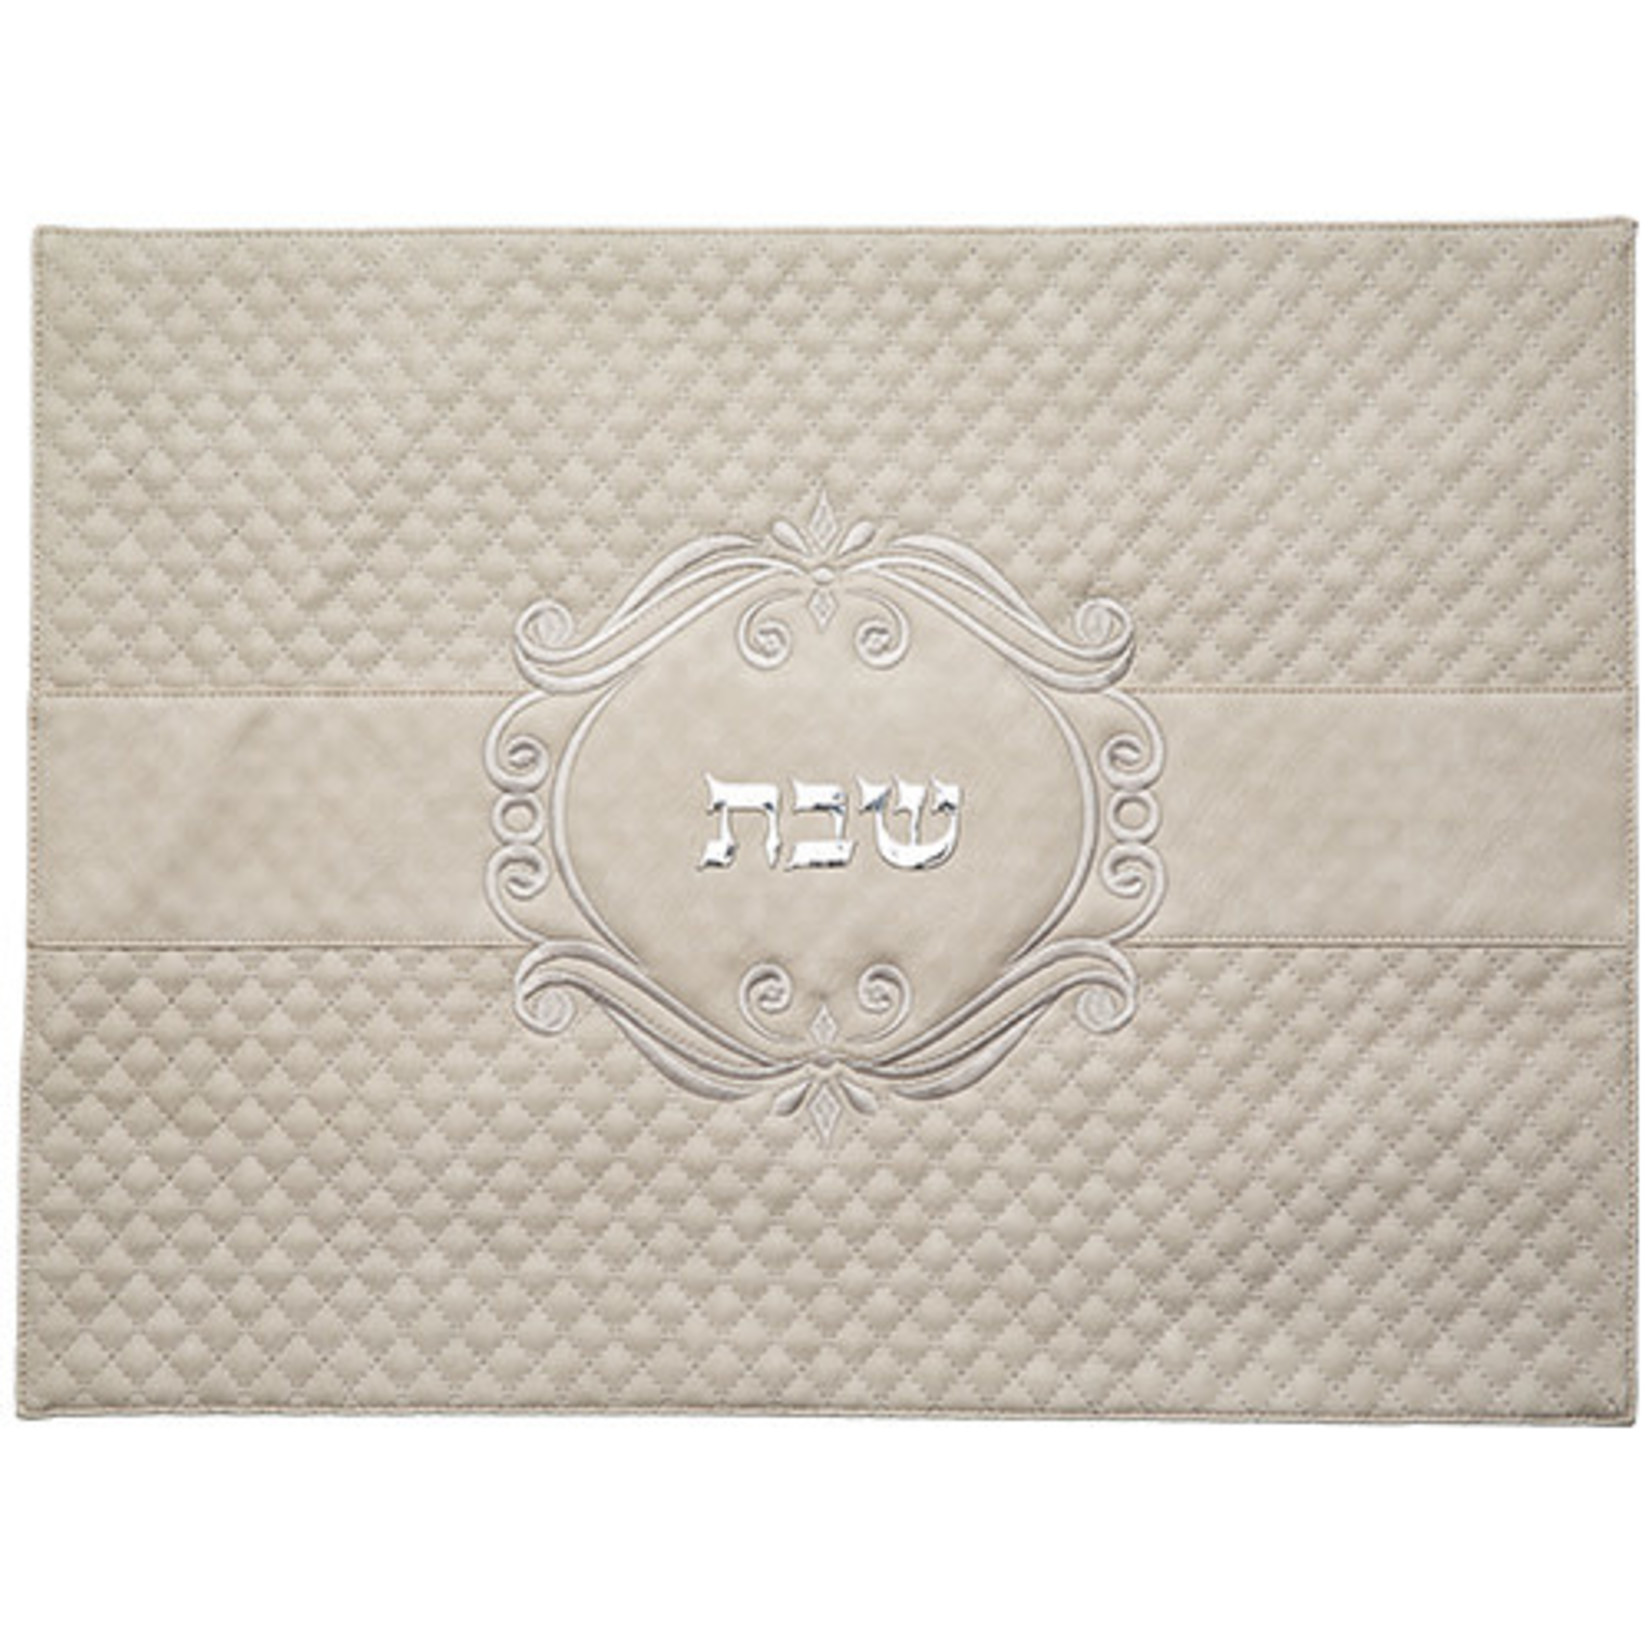 Leatherette Challah Cover, Grey